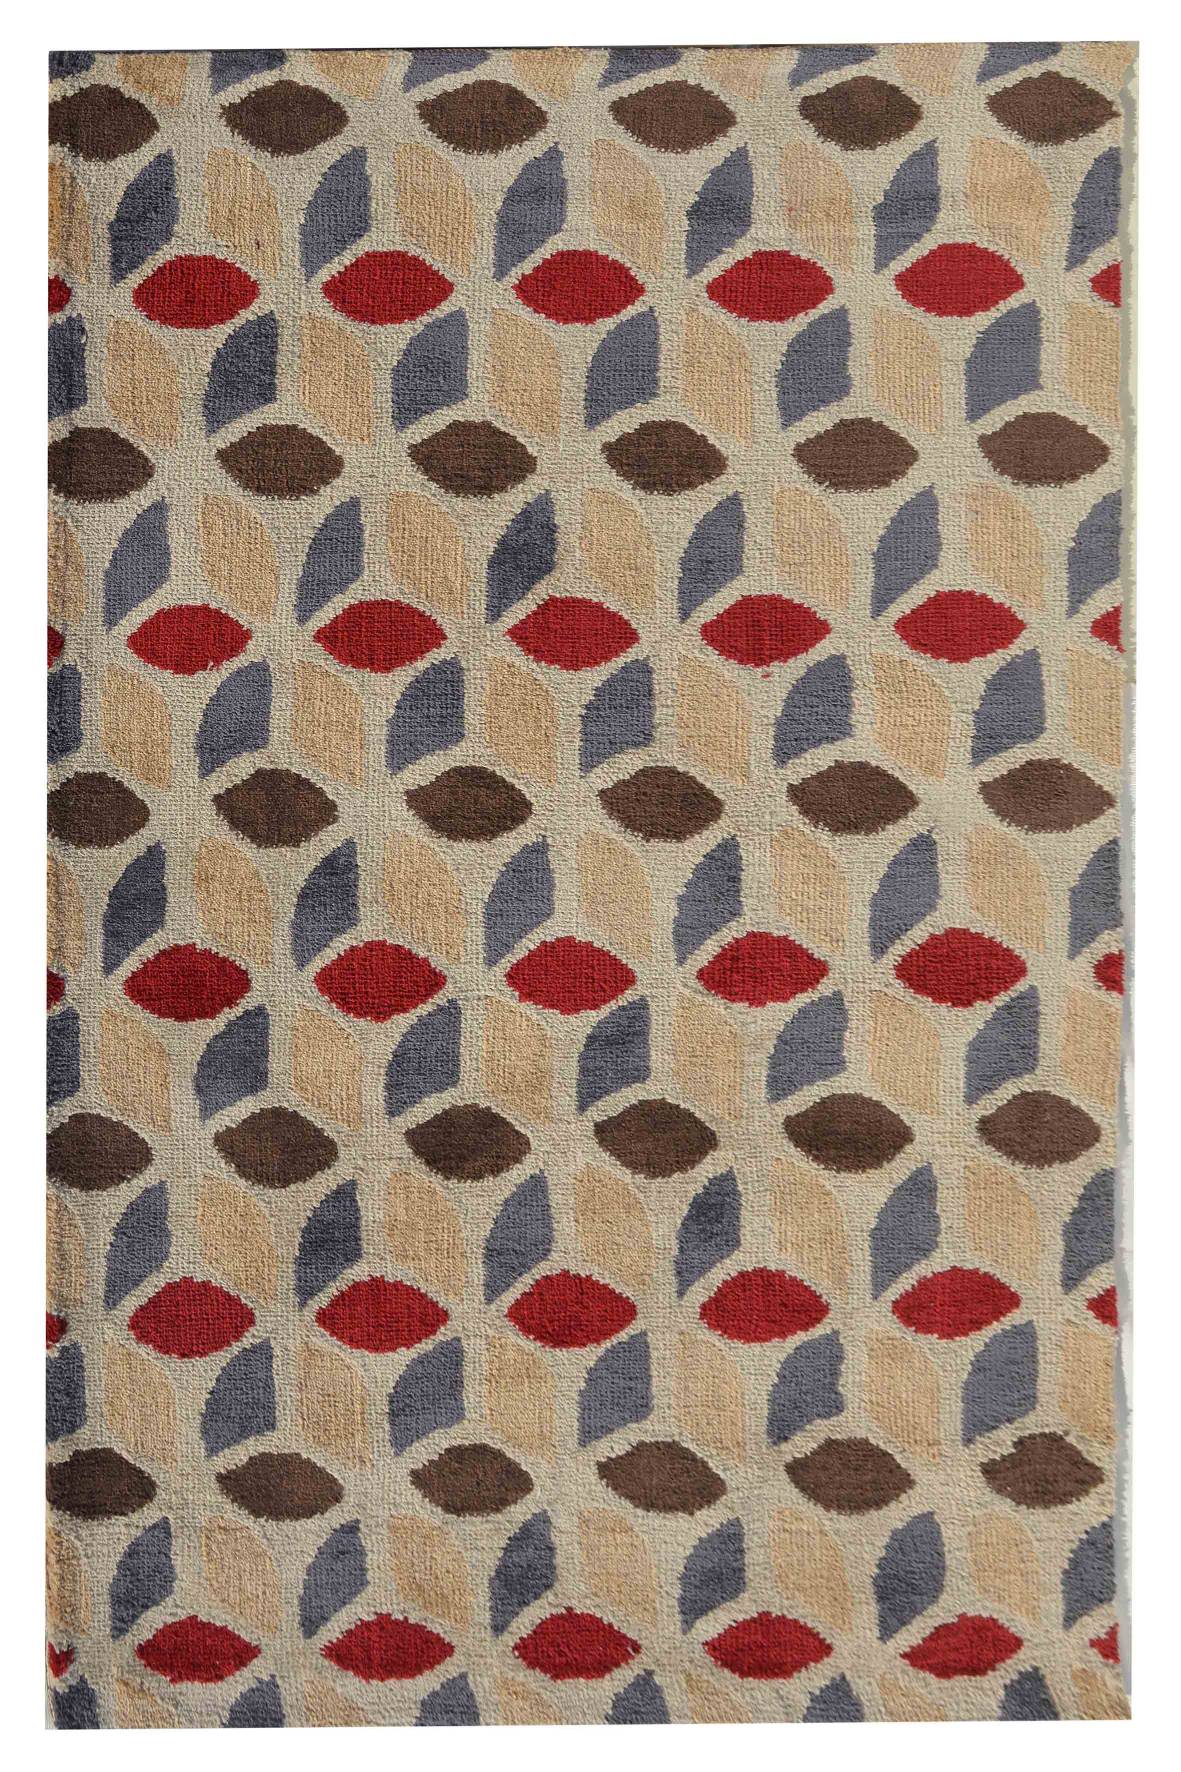 Detec™ Presto Multi Color Abstract Polyester Patterned Carpet